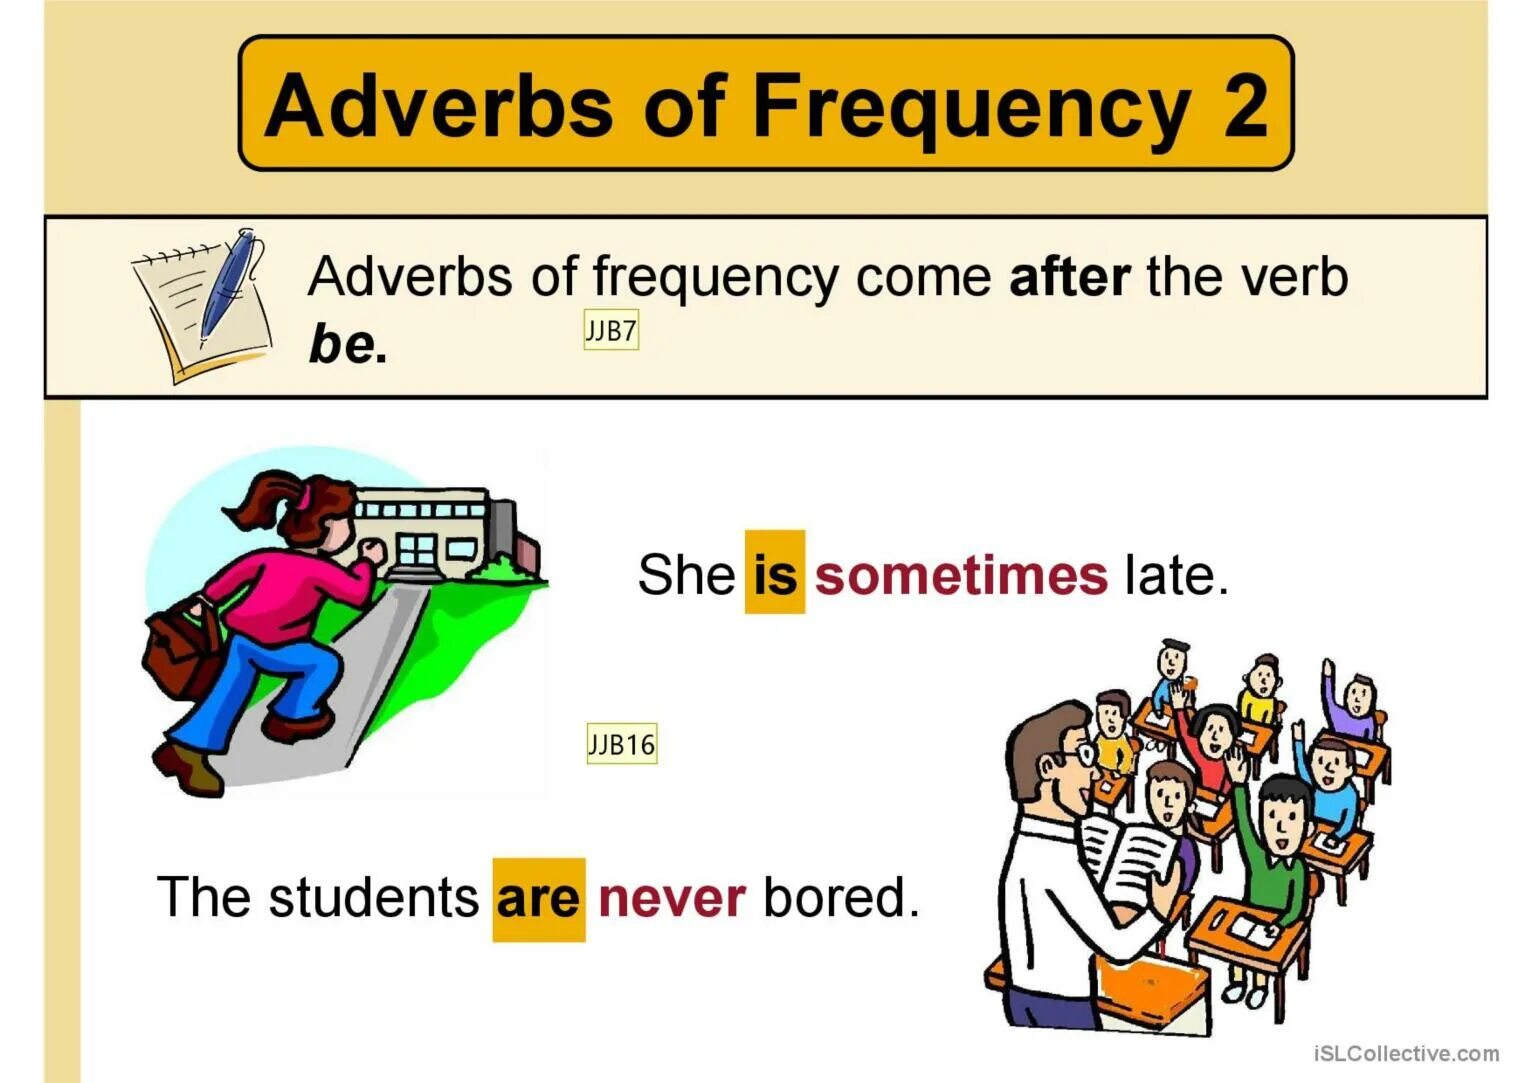 Adverbs of Frequency. Adverbials of Frequency. Adverbs of Frequency схема. Adverbs of Frequency для детей.